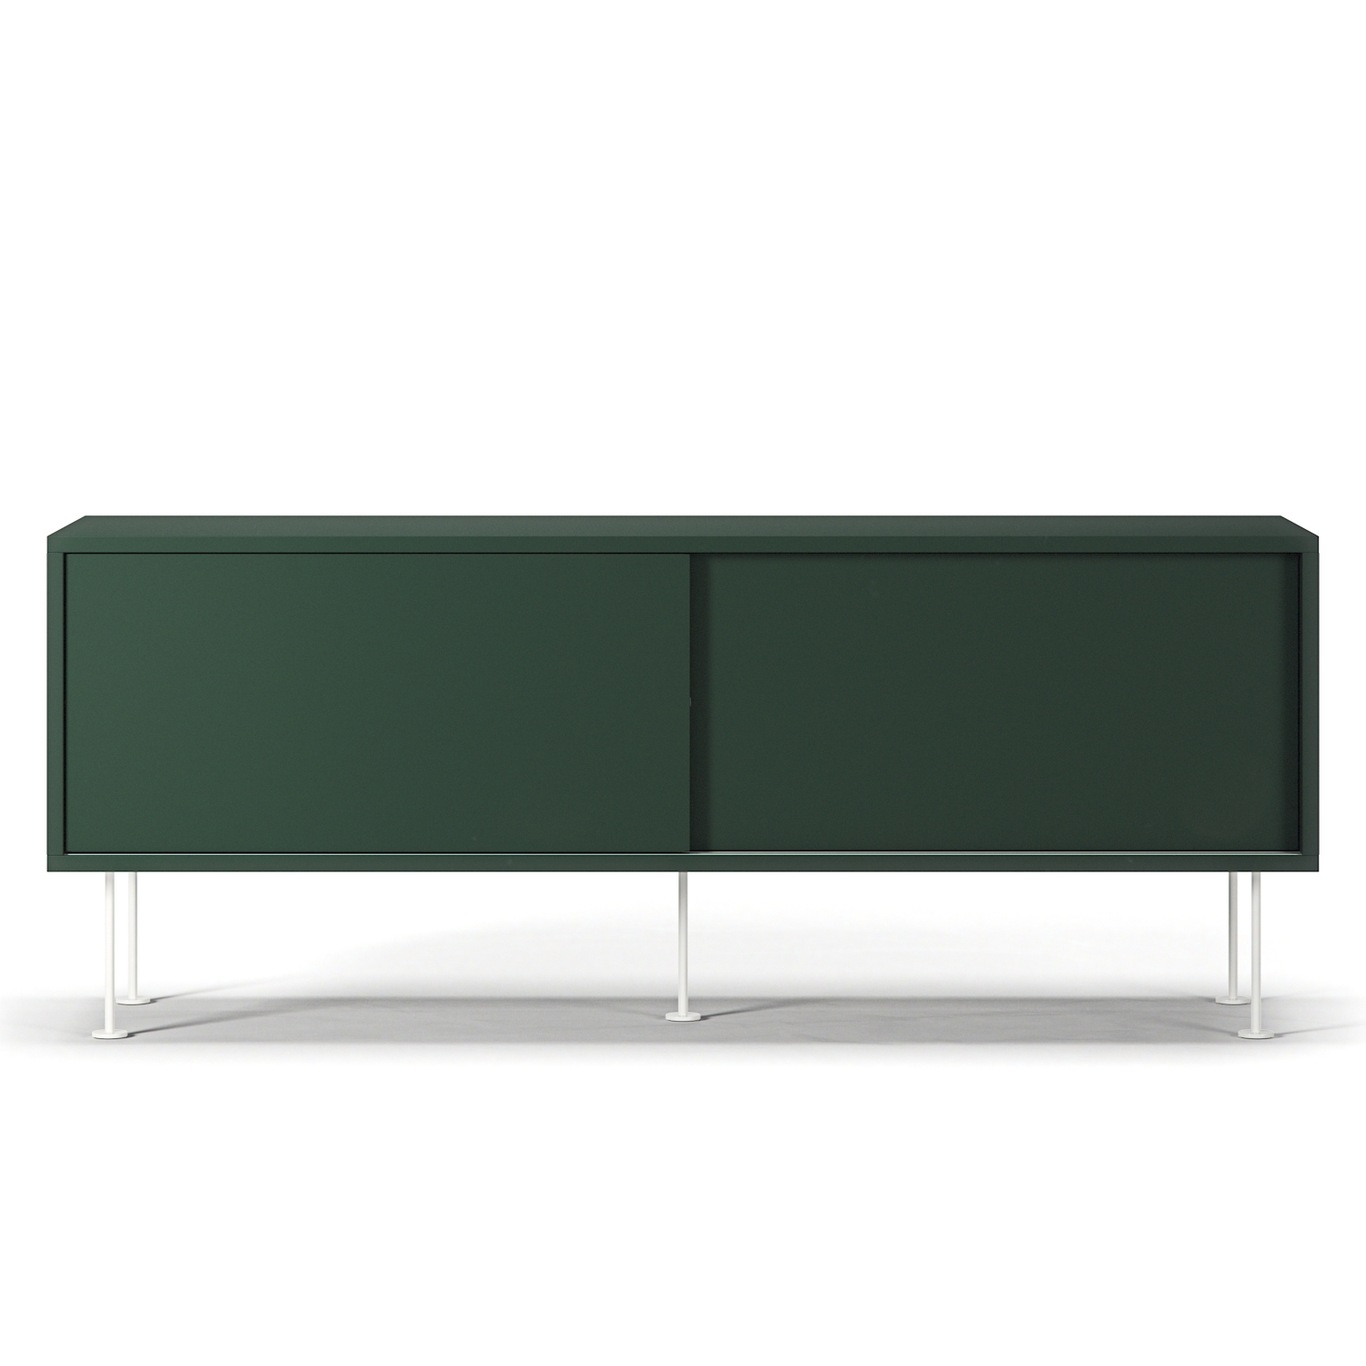 Vogue Media Bench With Legs 136 cm, Green / White